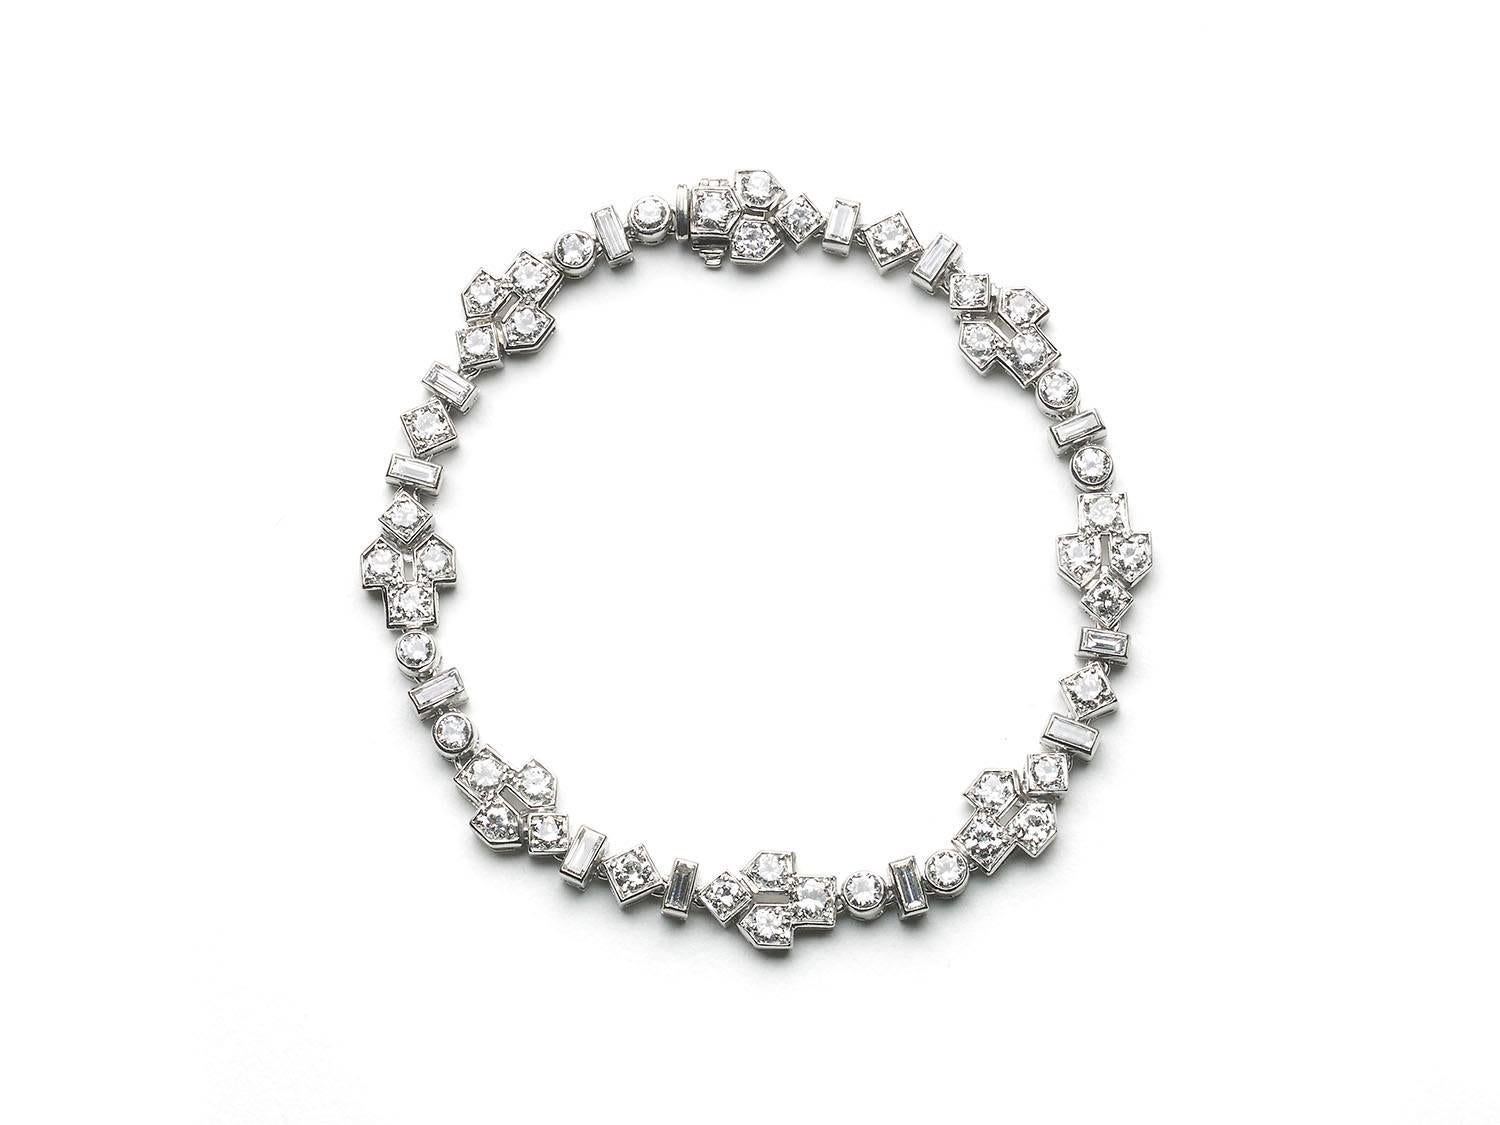 A vintage diamond bracelet, set with baguette, Edwardian and round brilliant-cut diamonds, in rub over settings, mounted in platinum, circa 1950. Estimated total diamond weight 5.60ct